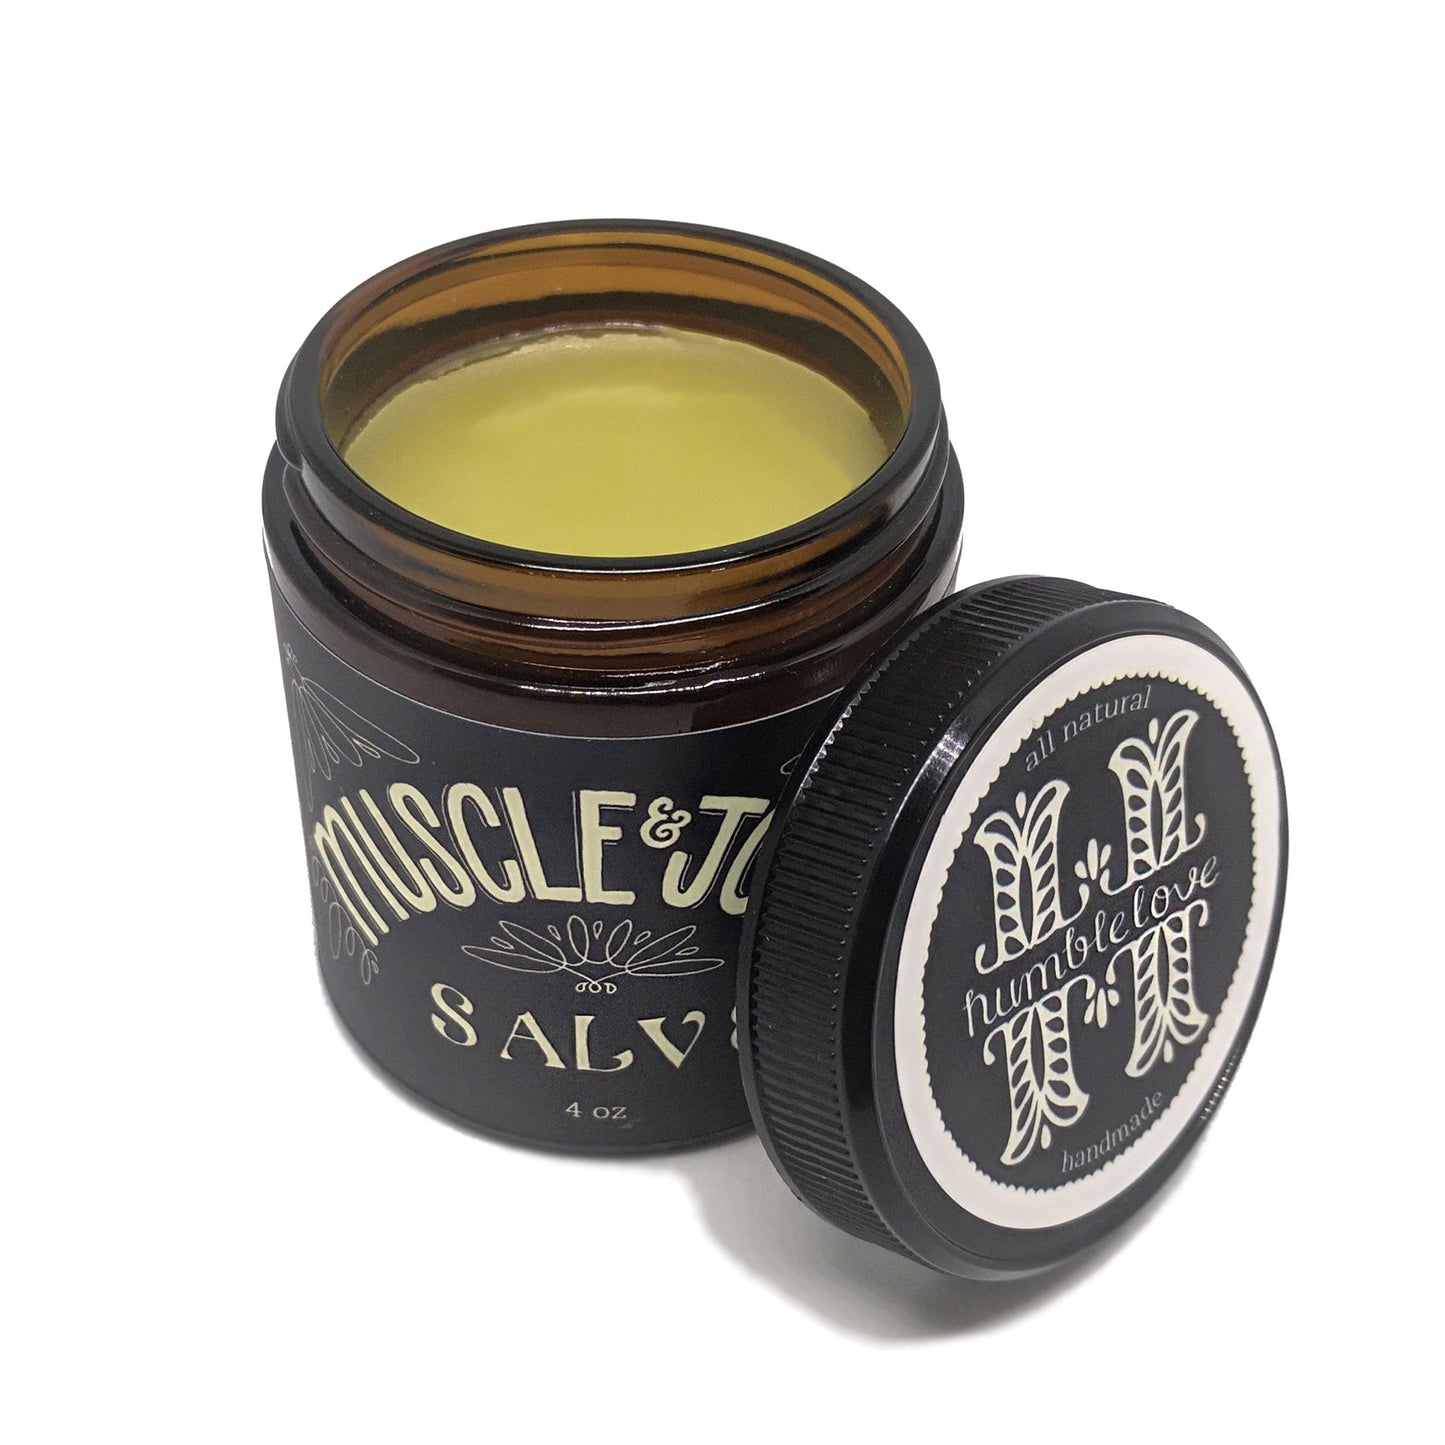 Muscle & Joint Herbal Salve - 4oz